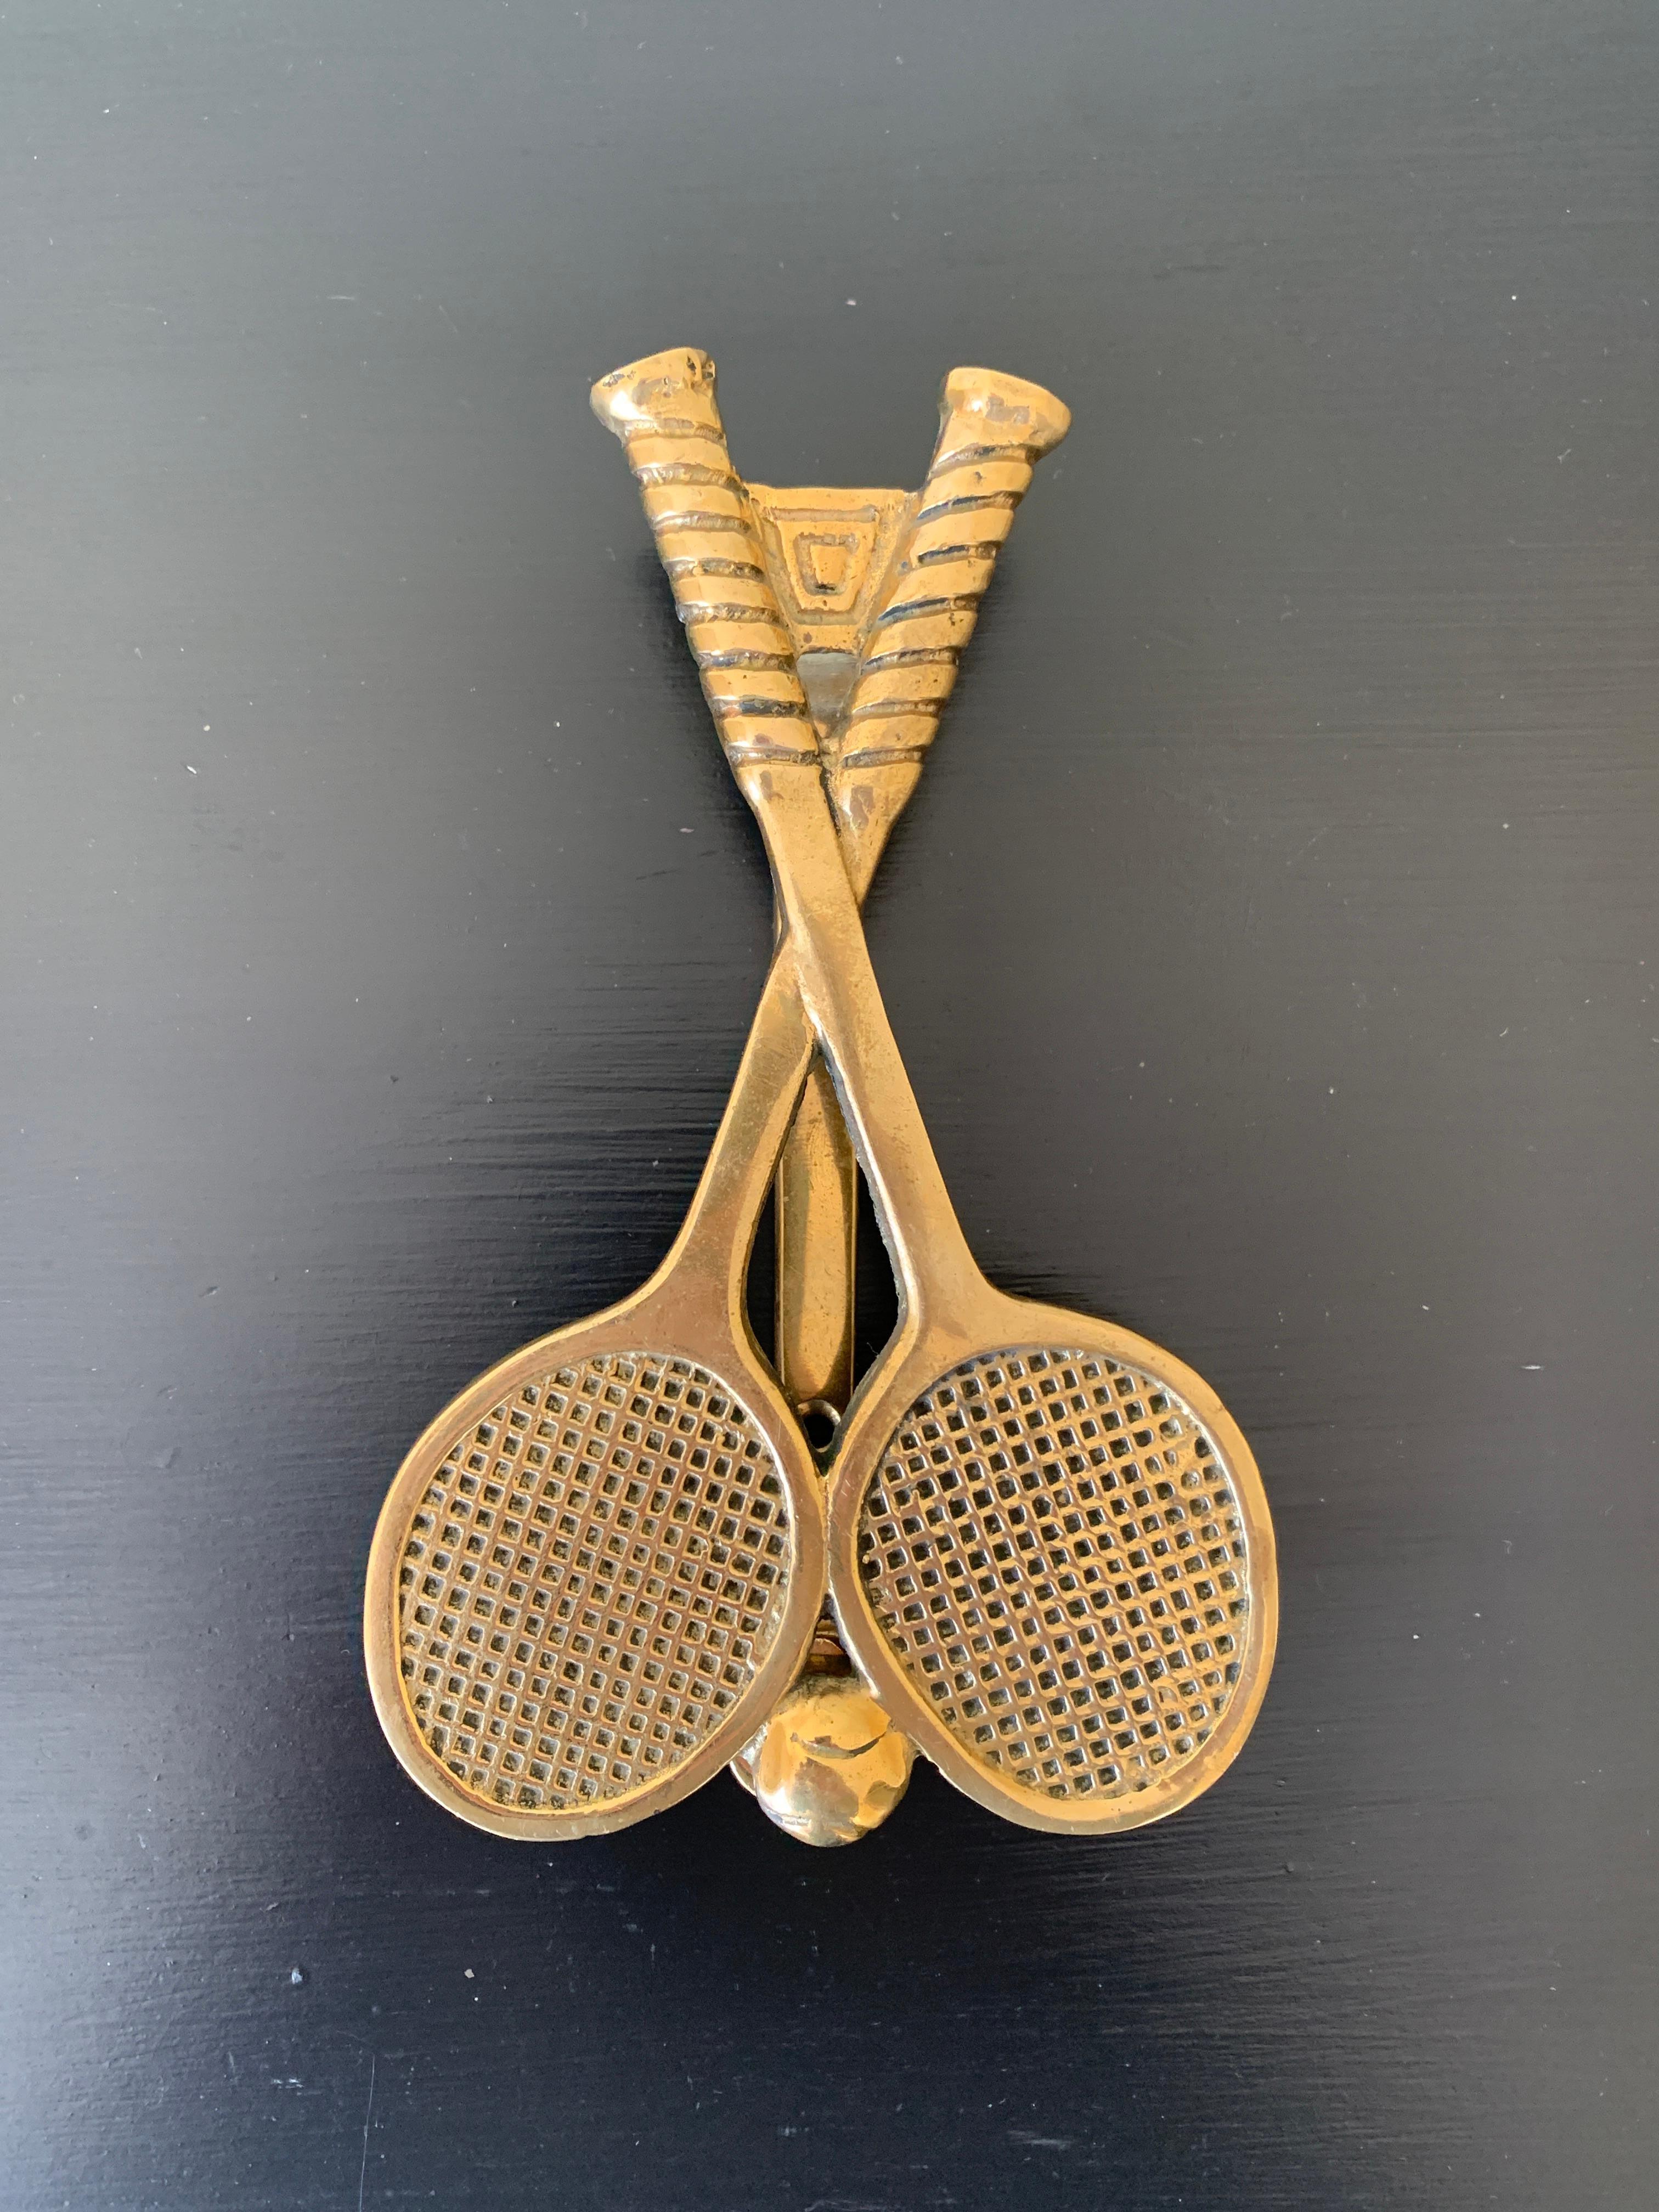 A beautiful cast brass door knocker in the form of two tennis rackets and a tennis ball.

USA, Mid-20th Century

Measures: 4